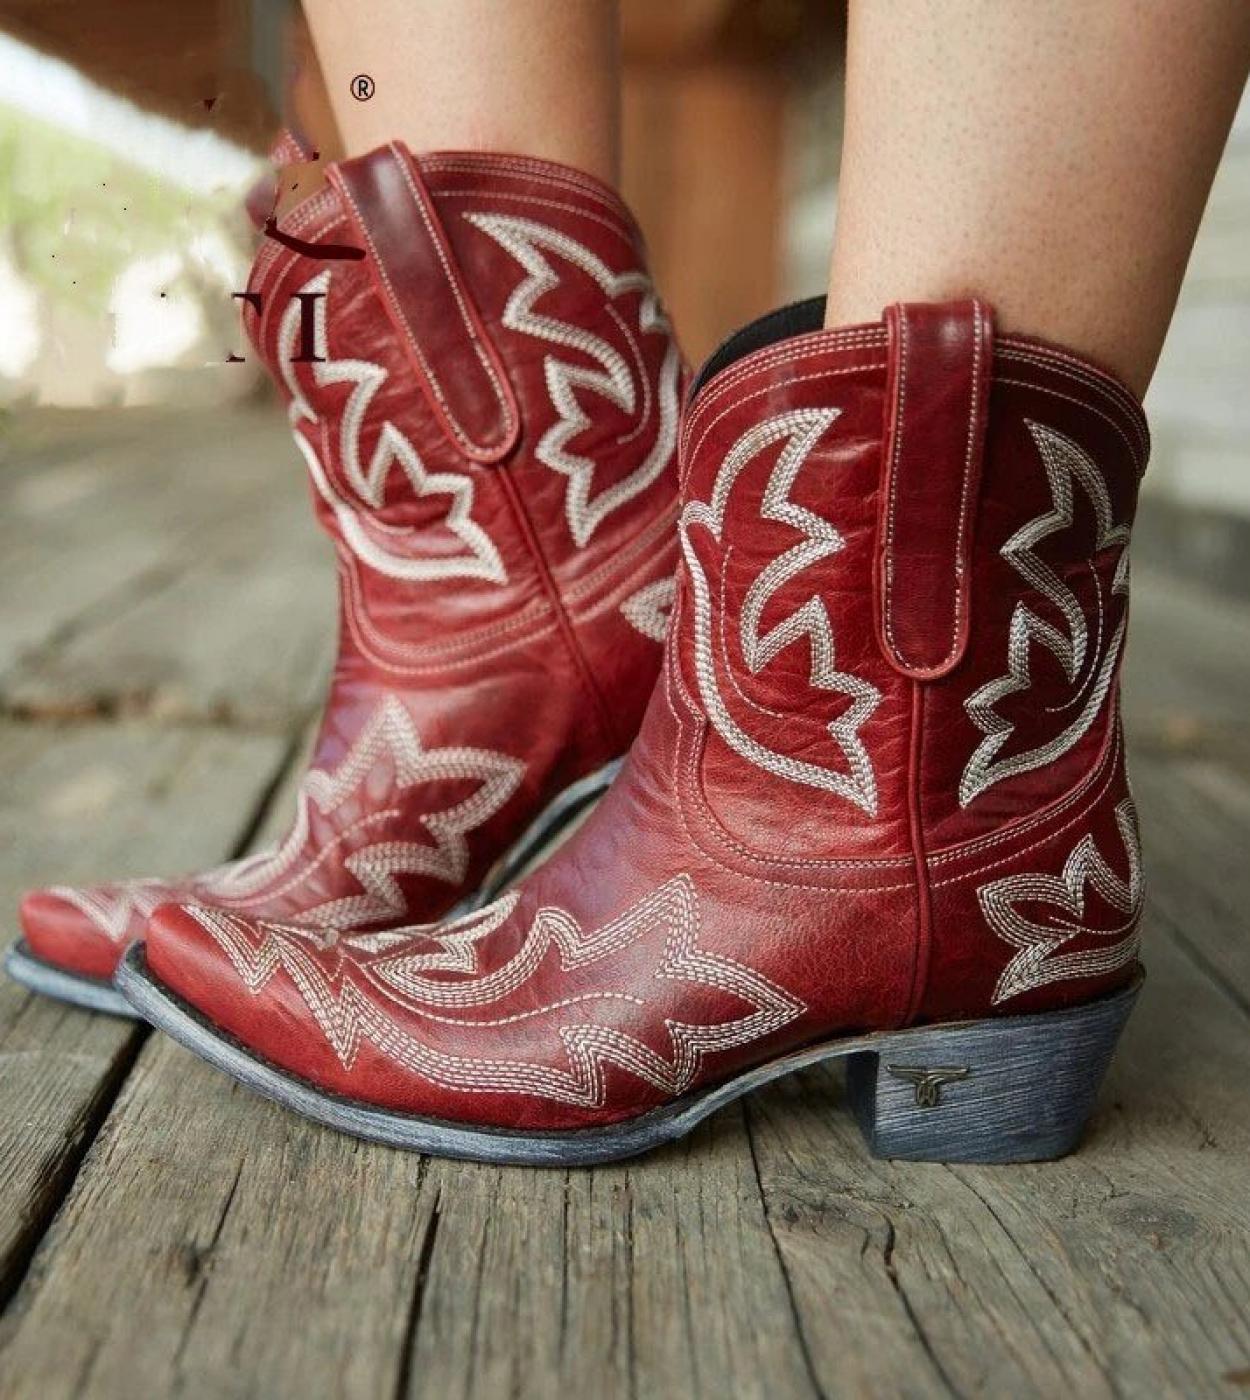  Classic Embroidered Western Cowboy Boots For Women Leather Cowgirl Boots Low Heels Shoes Knee High Woman Bootsankle Boo